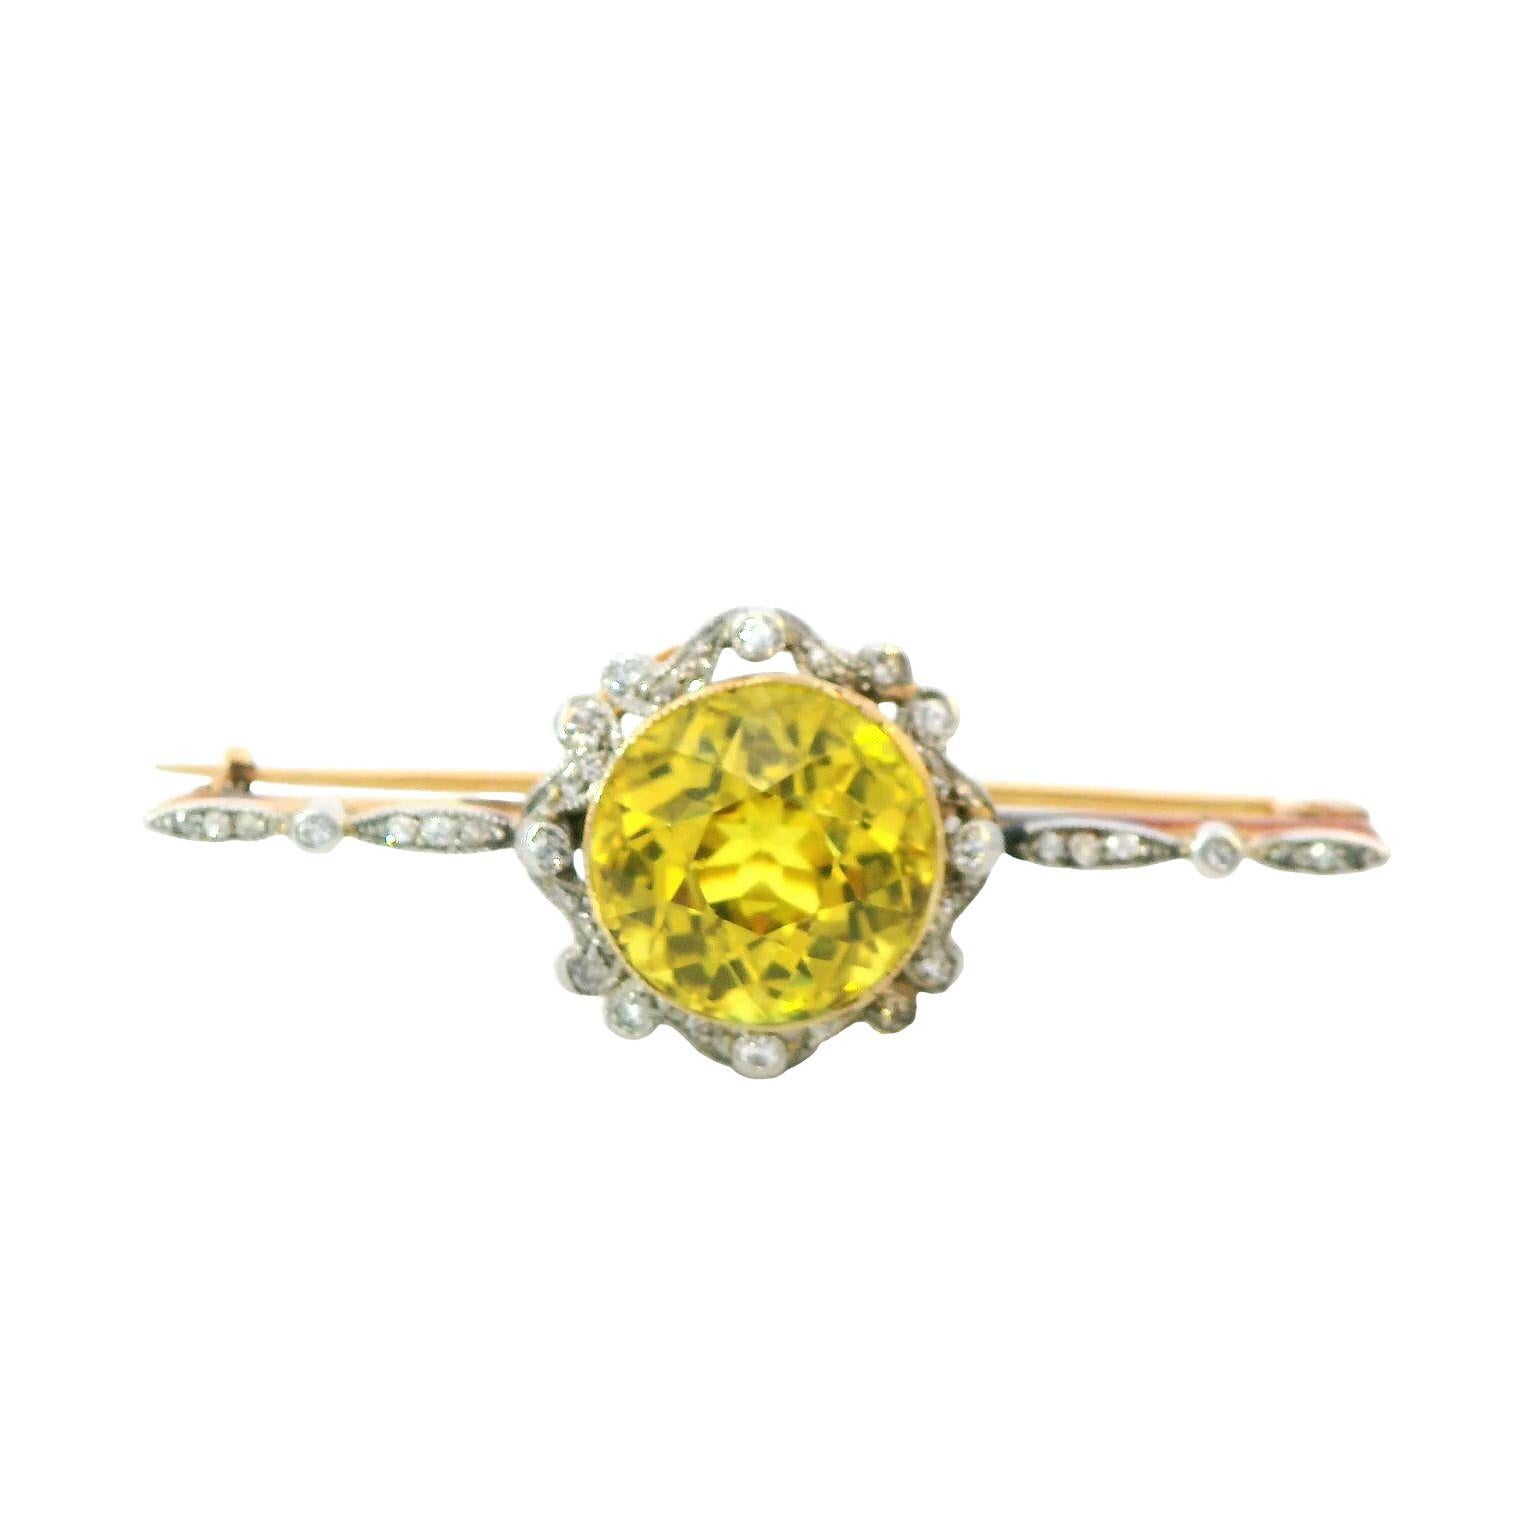 GIA Certified 9.65 Carat Yellow Sapphire and Diamond Art Deco 18K Gold Brooch For Sale